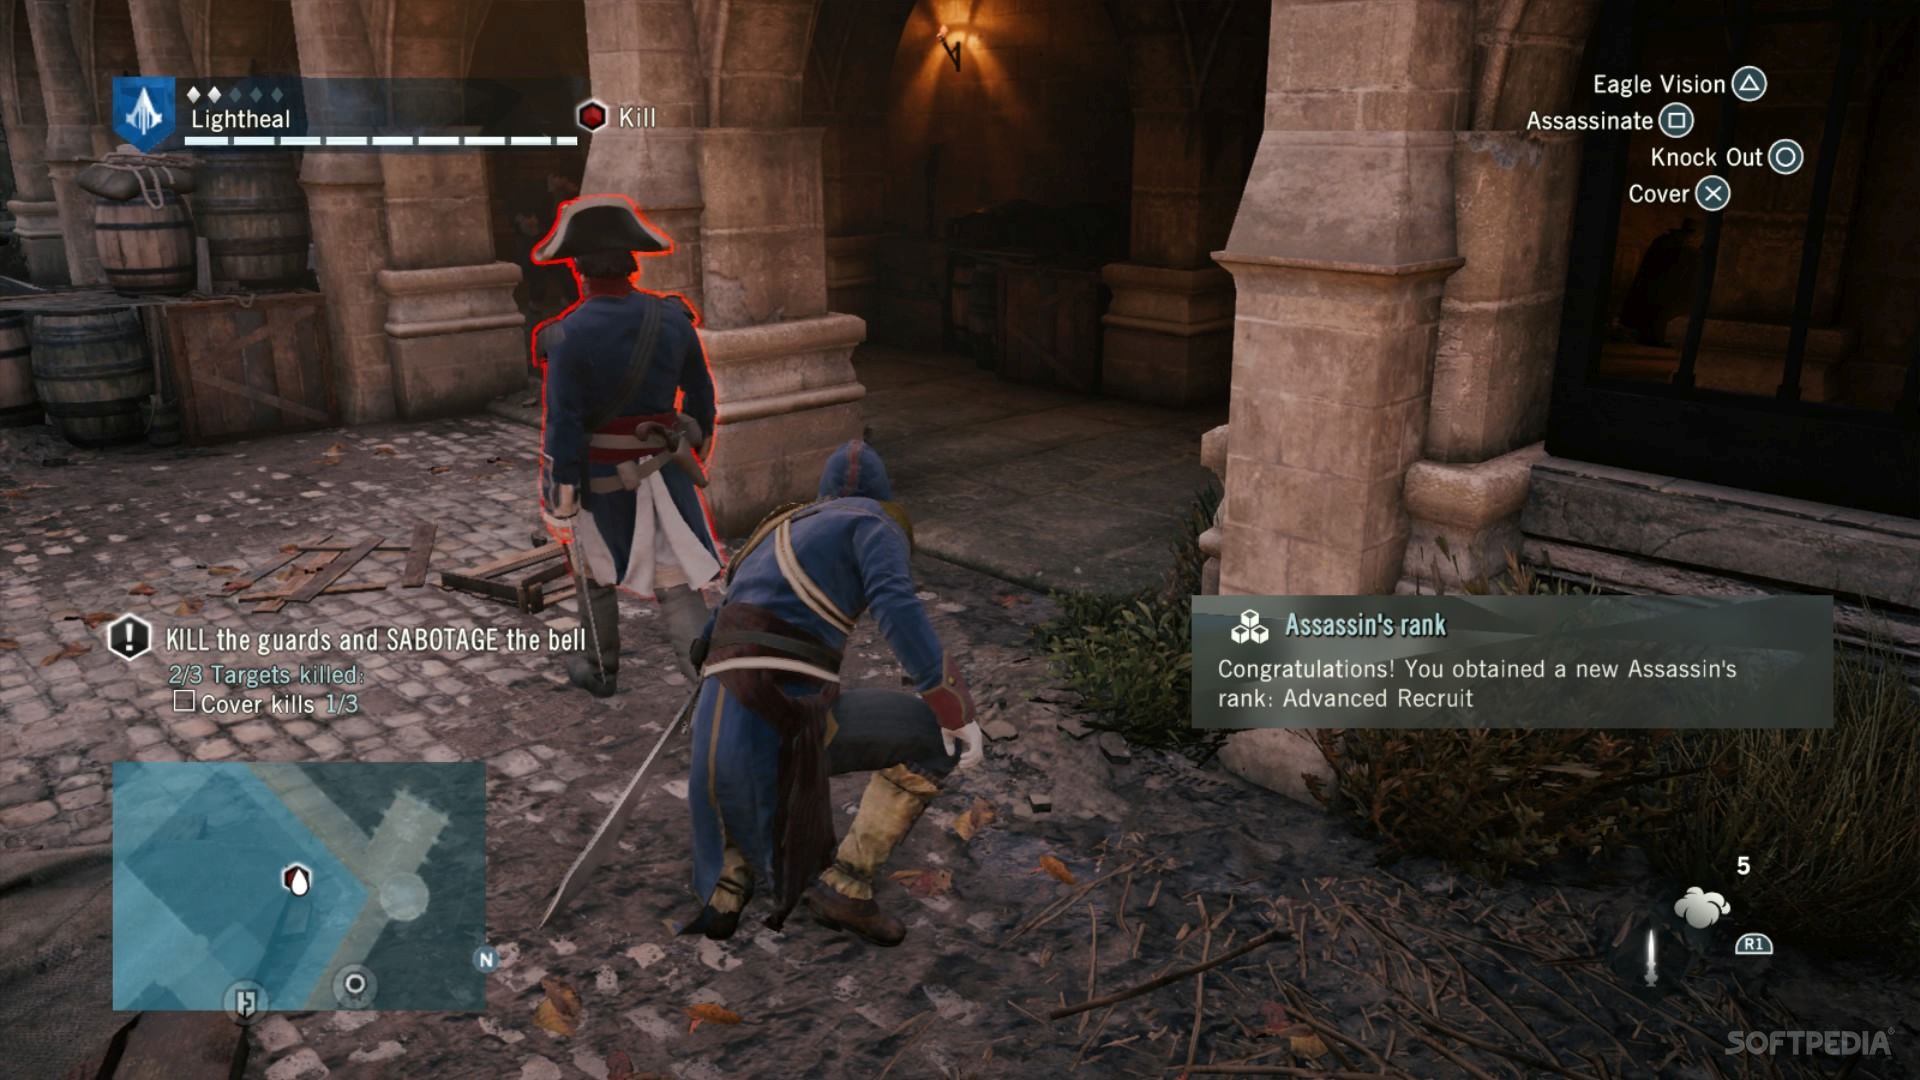 Download-Now-Assassin-s-Creed-Unity-Patc